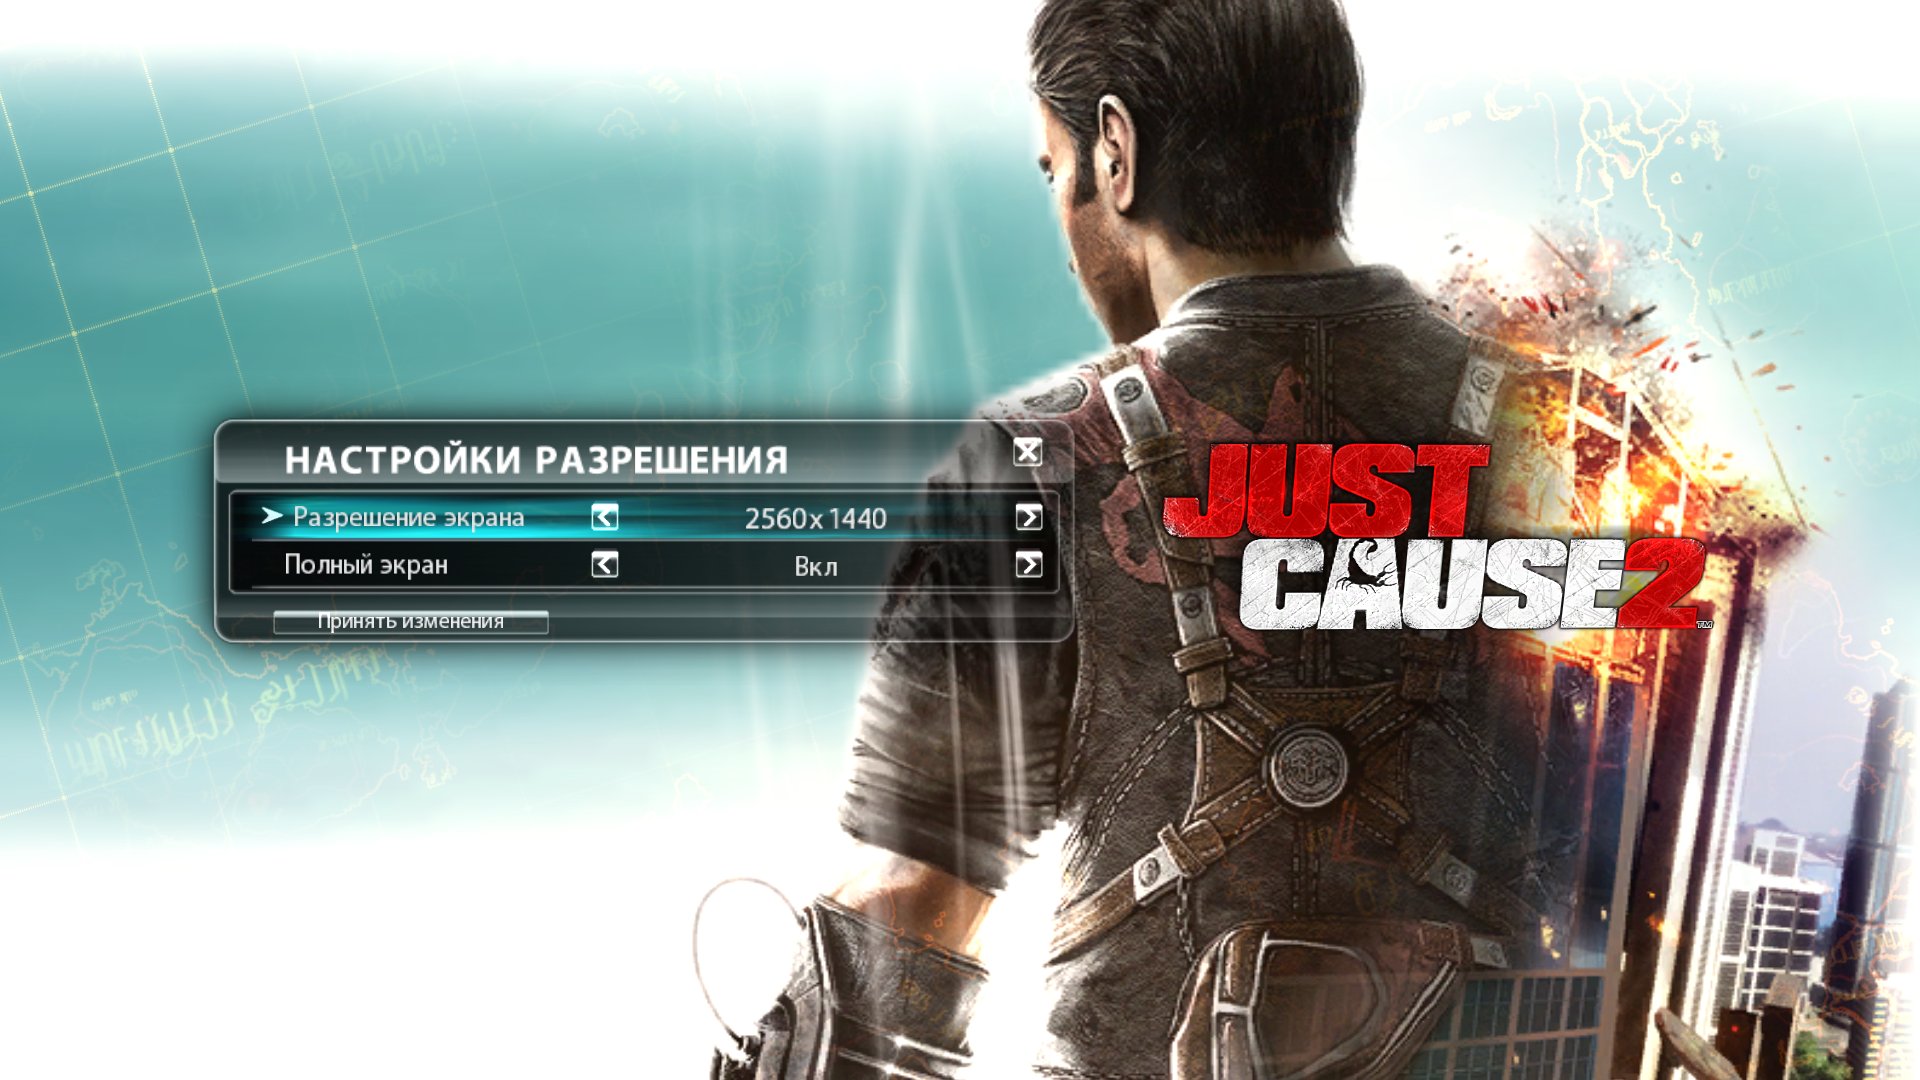 This is just a game. Just cause 2 Xbox 360 диск. Just cause 1 диск. Just cause 2 диск. Разрешение экрана в играх.